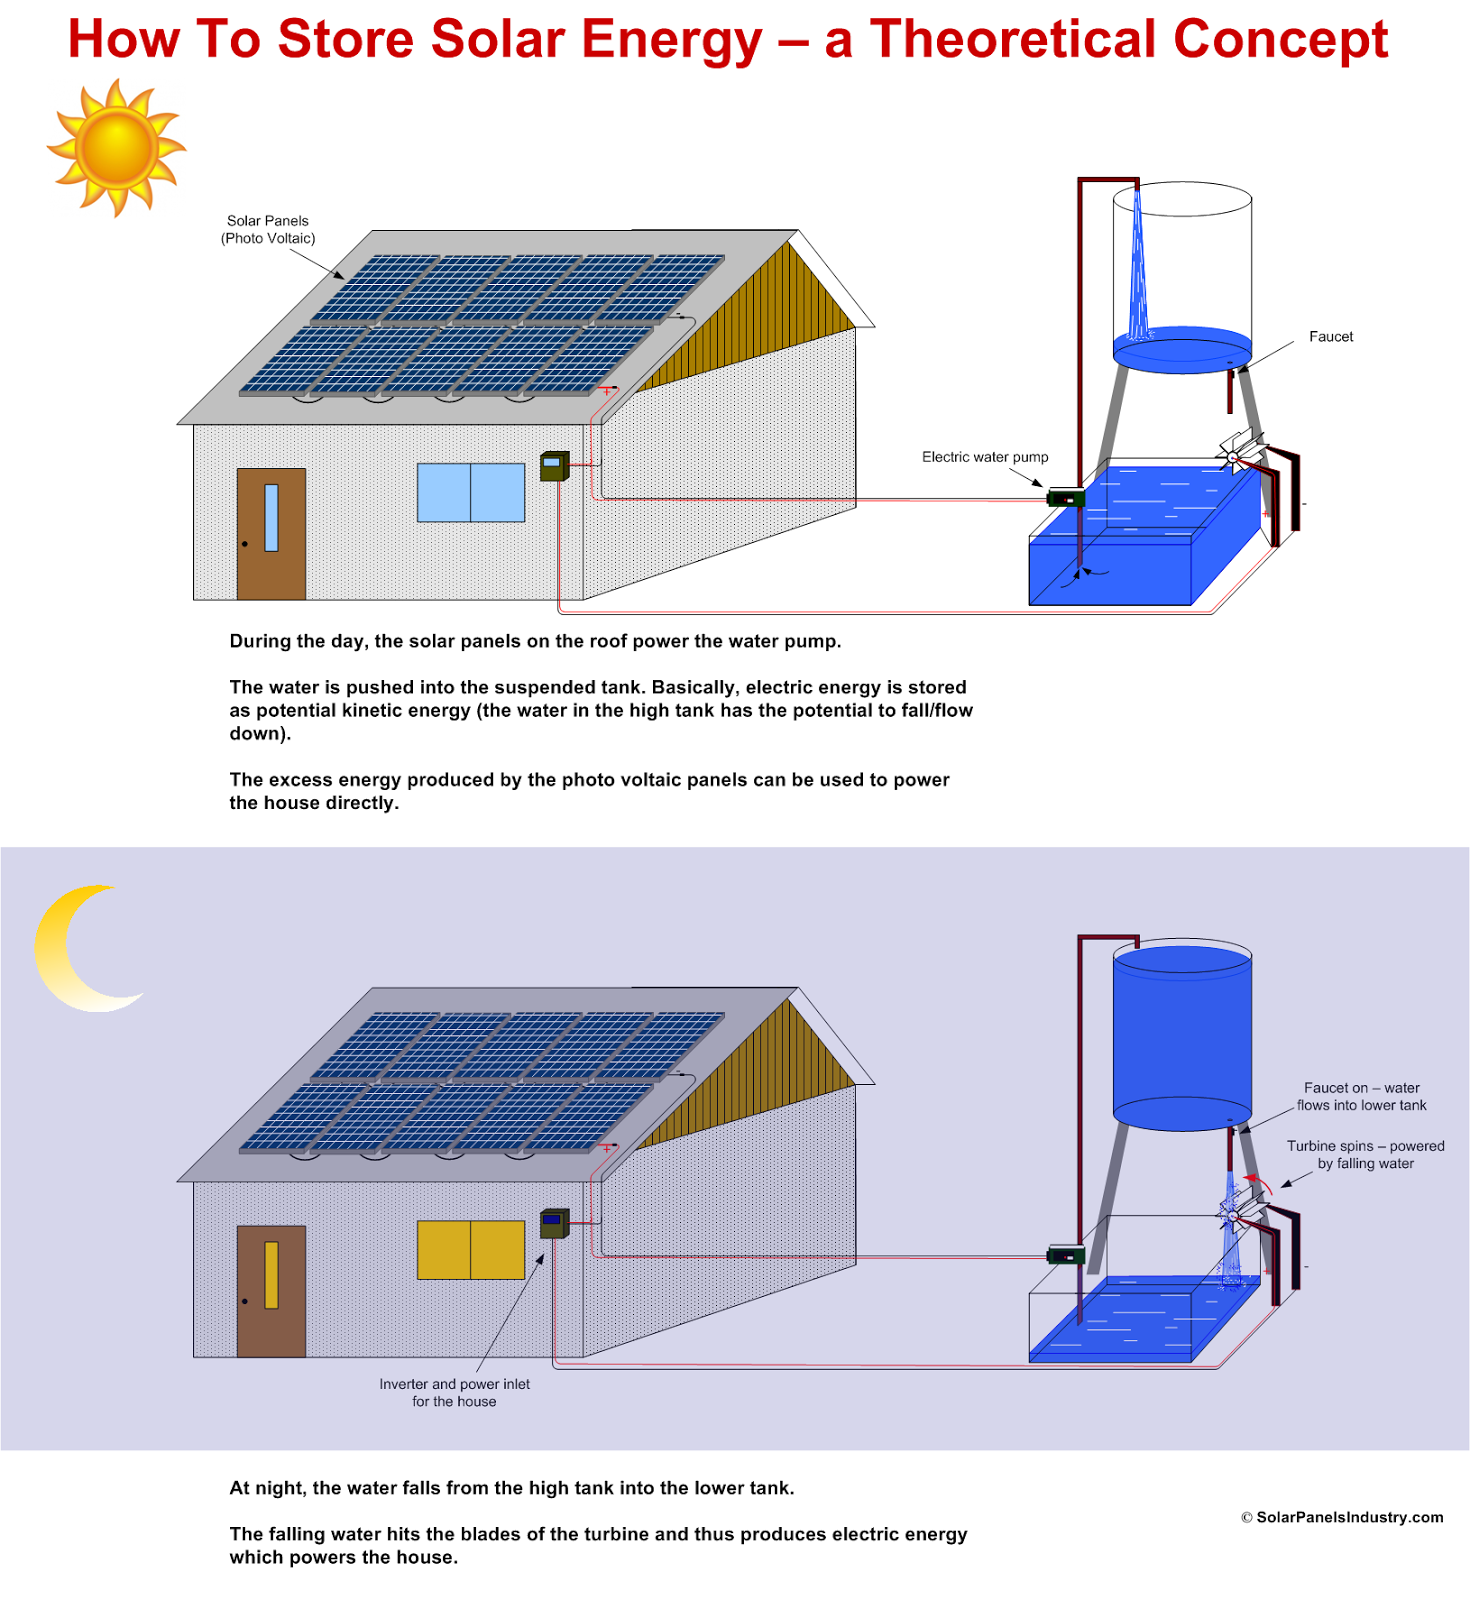 How To Store Solar Energy